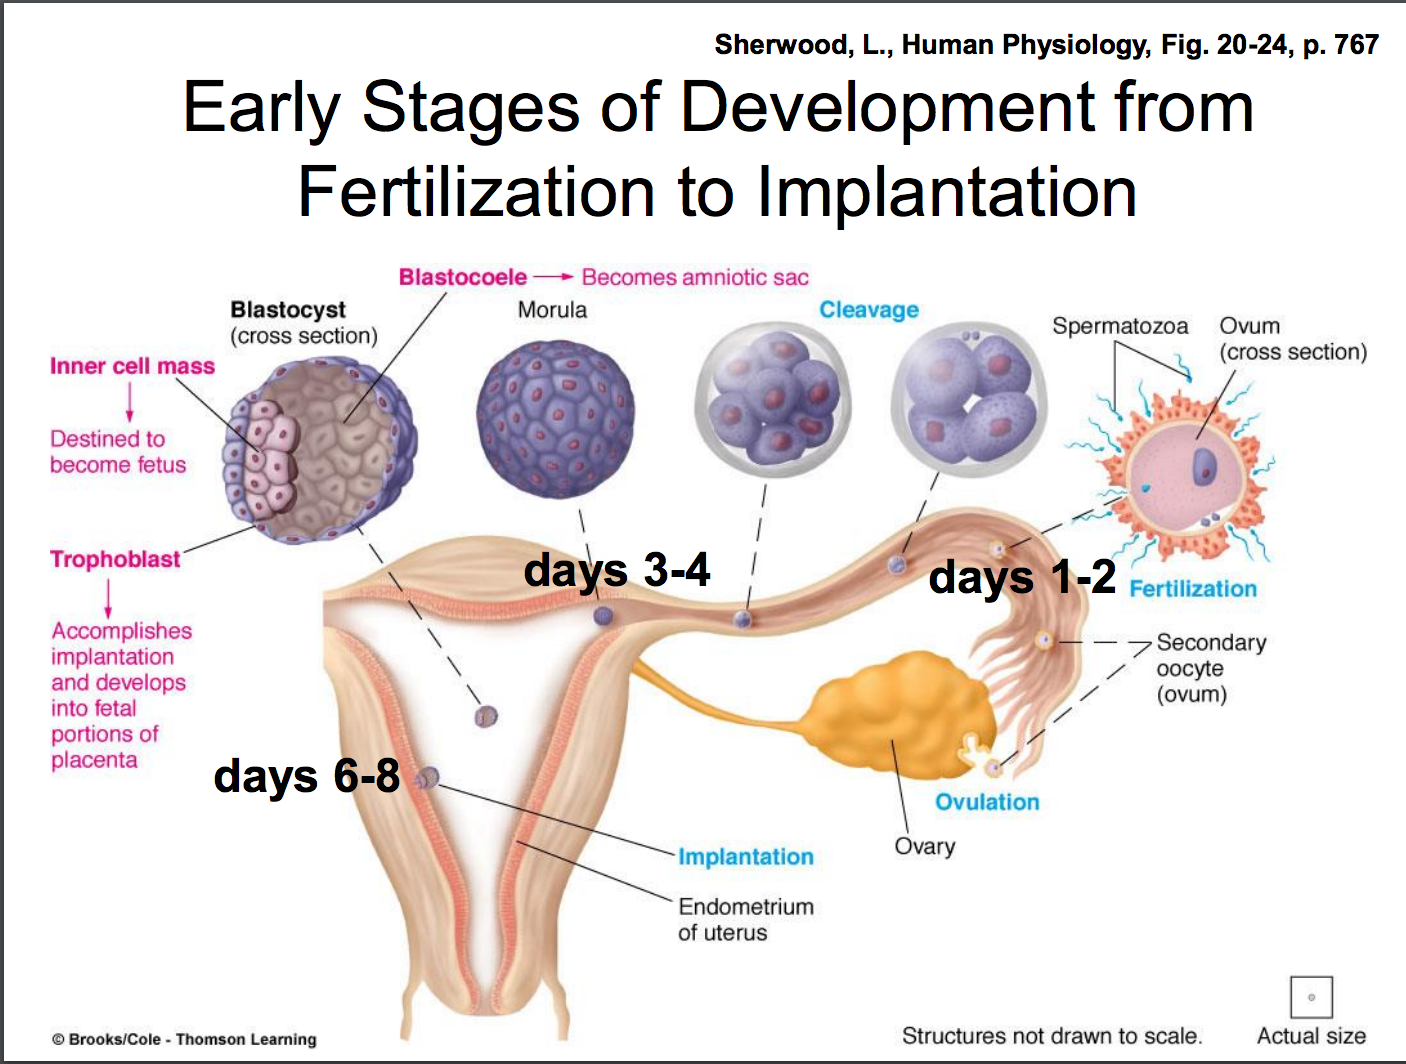 conception and implantation